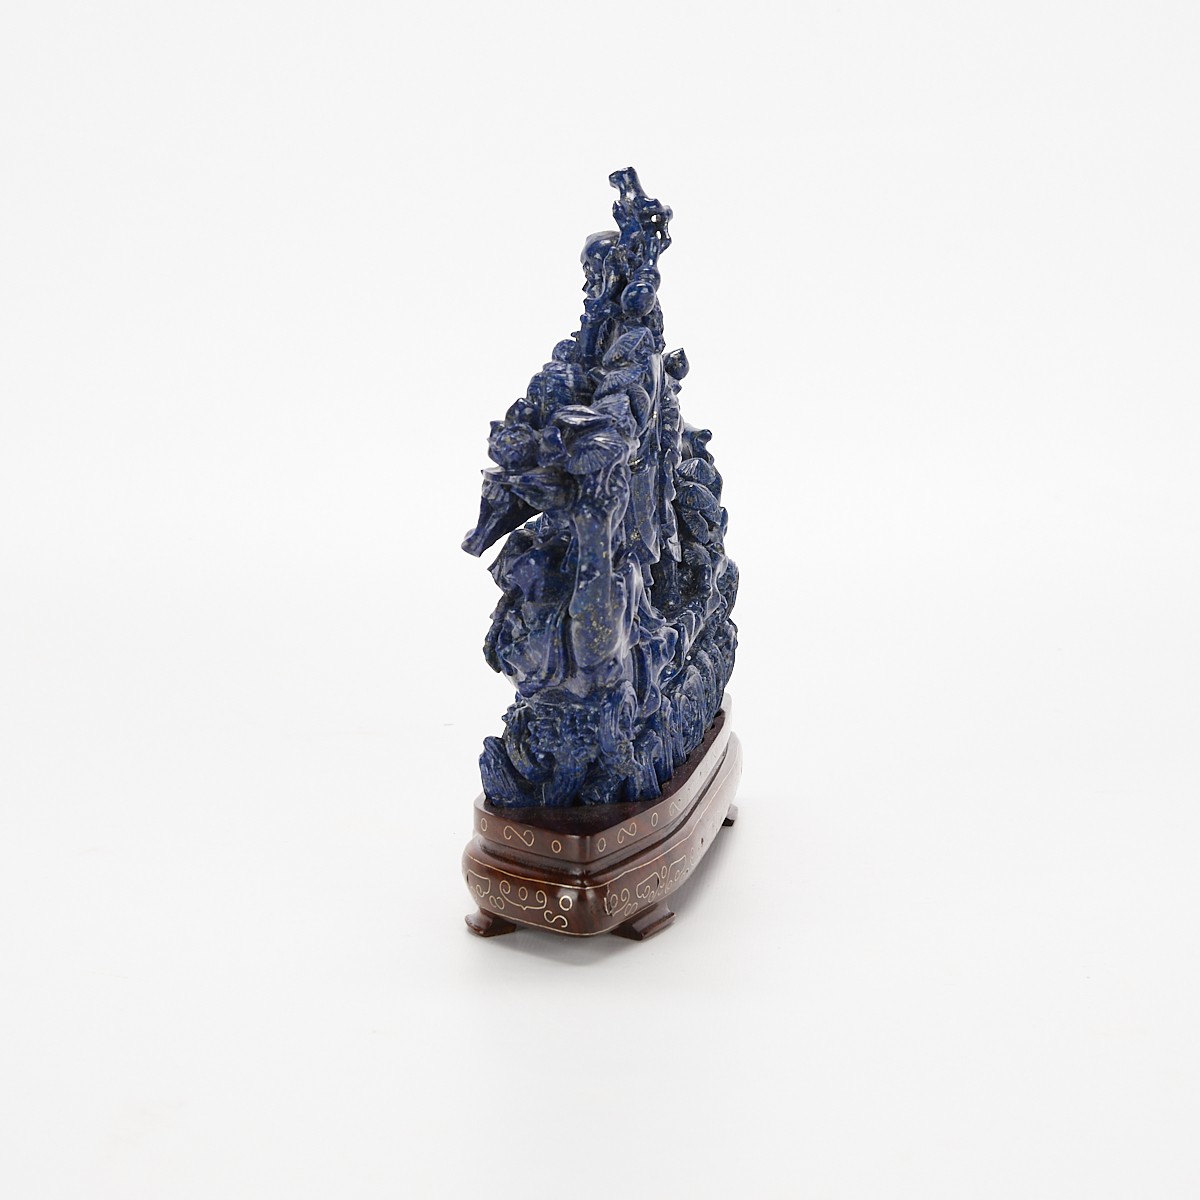 Chinese Lapis Lazuli Carved Sculpture - Image 5 of 11